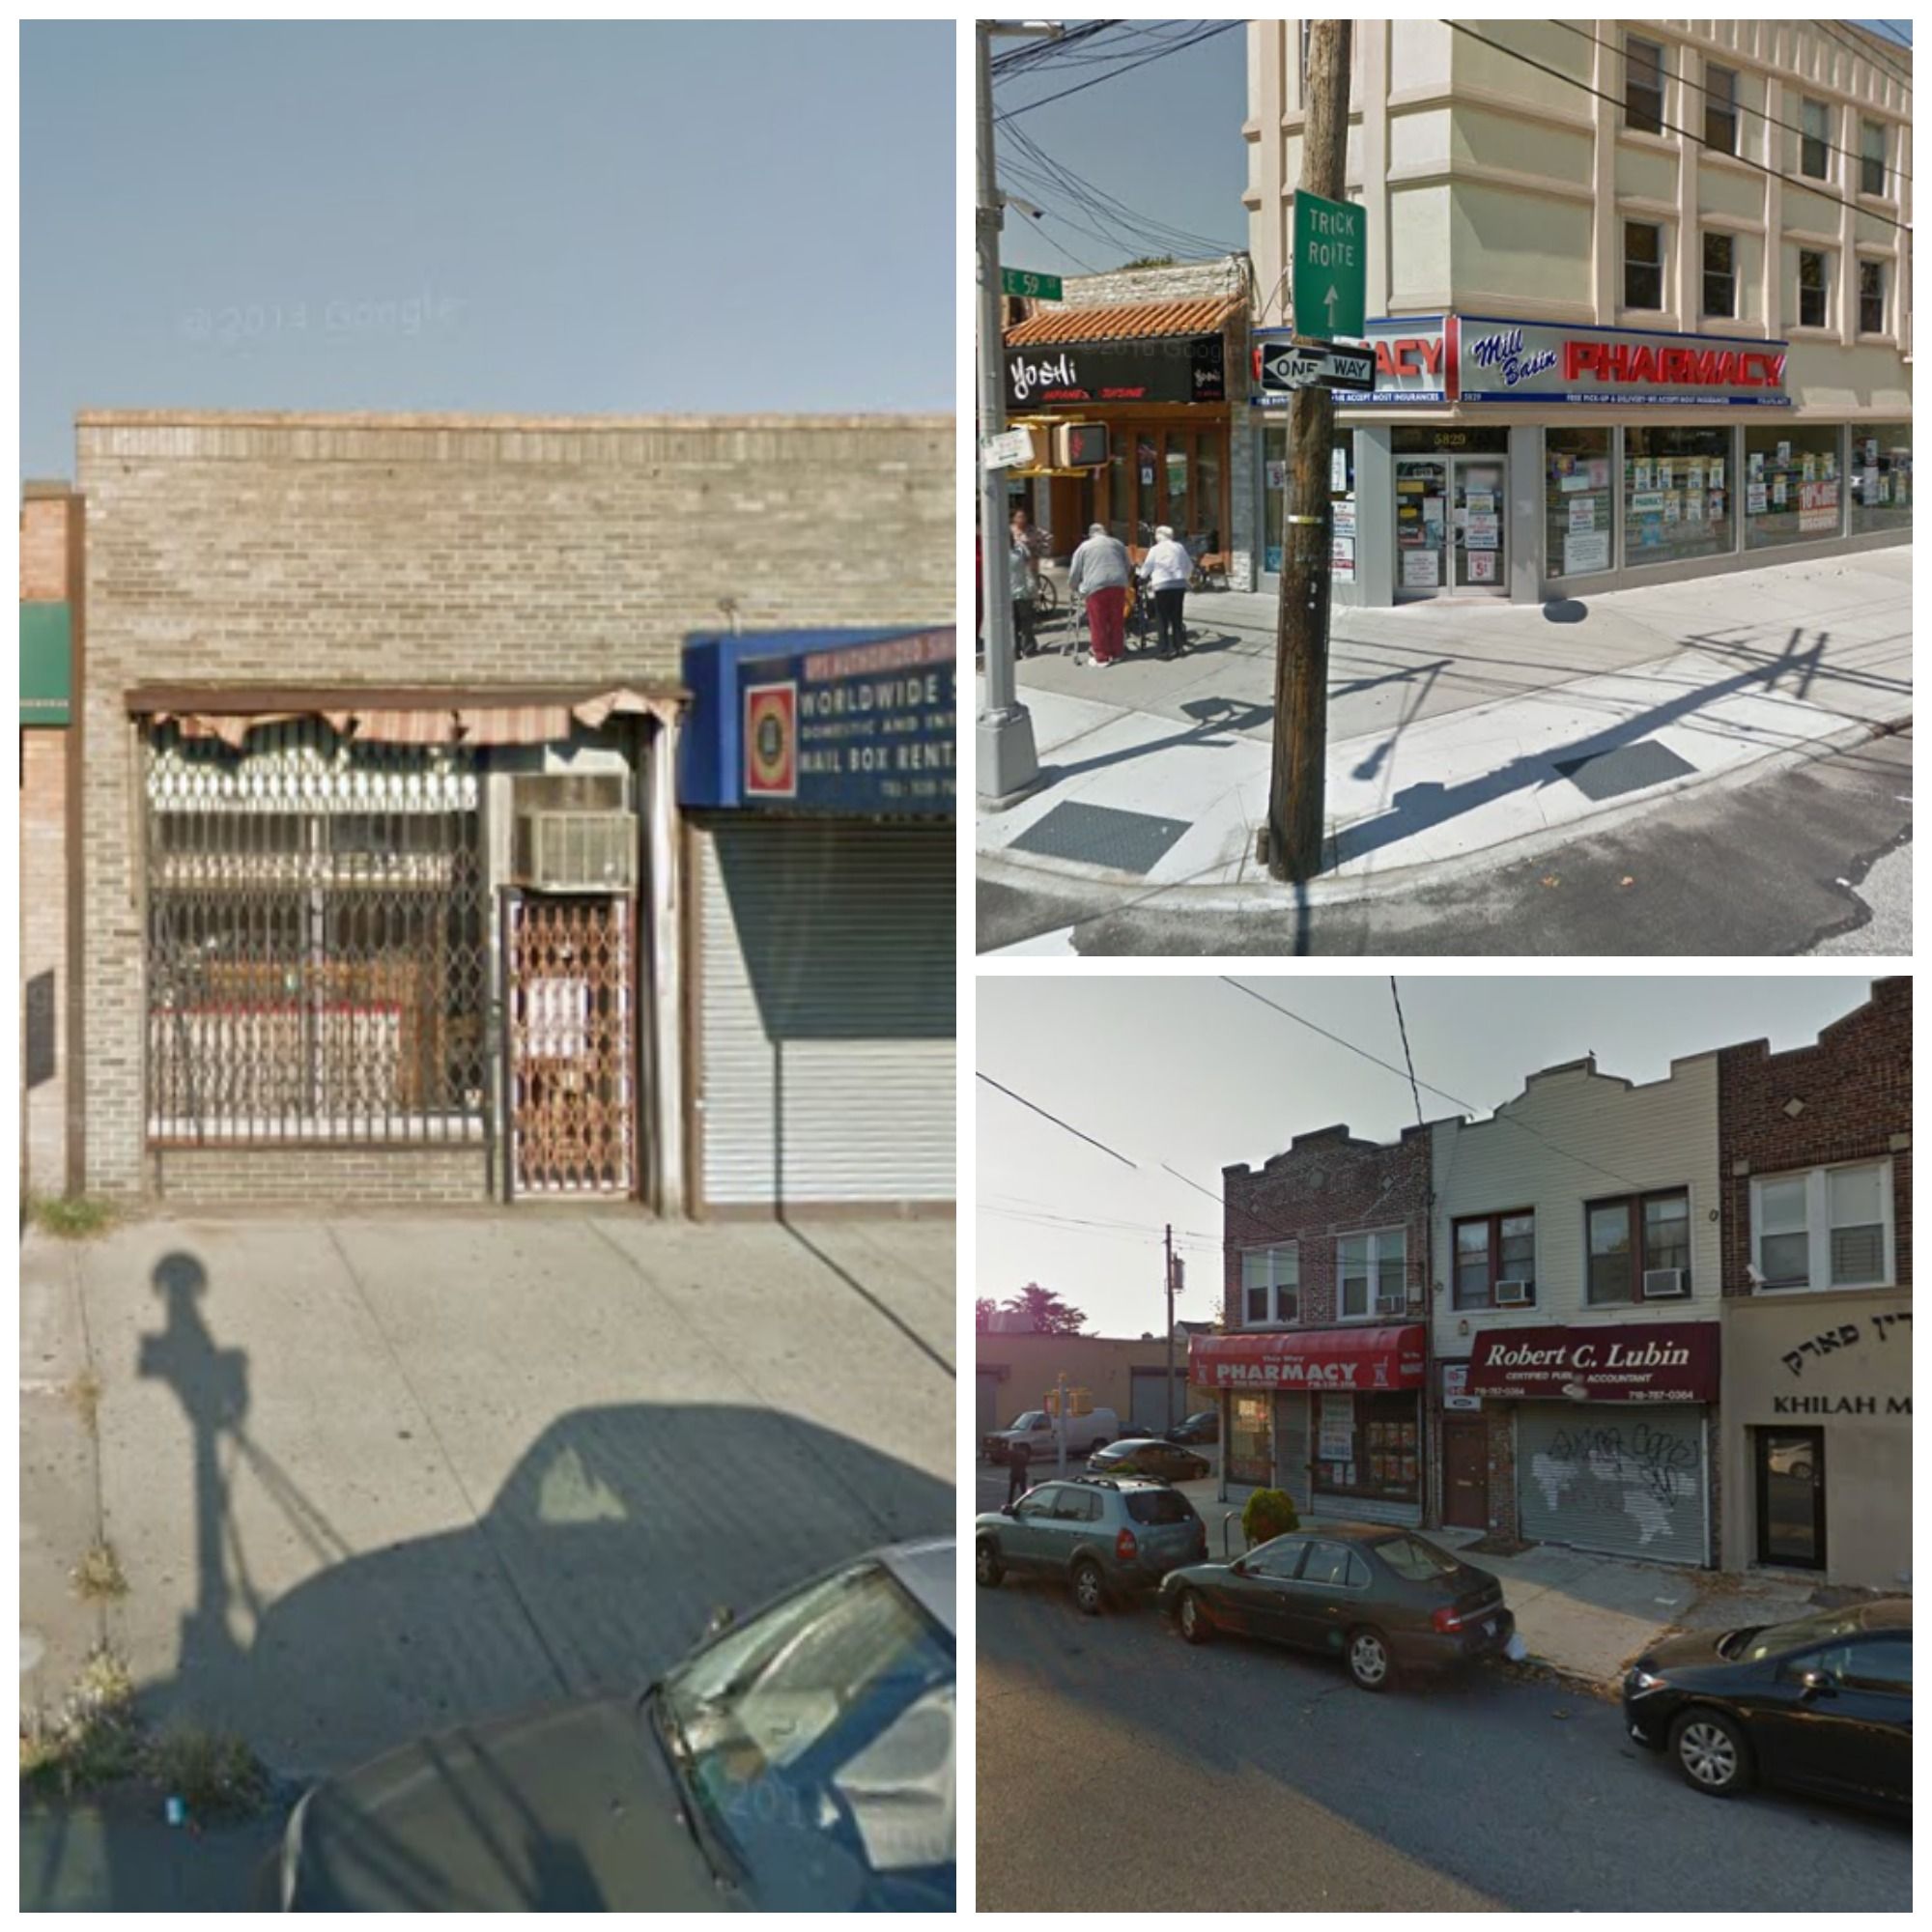 Two Pharmacies And A Cigar Shop Are Victims In String Of Robberies In The 63rd Precinct